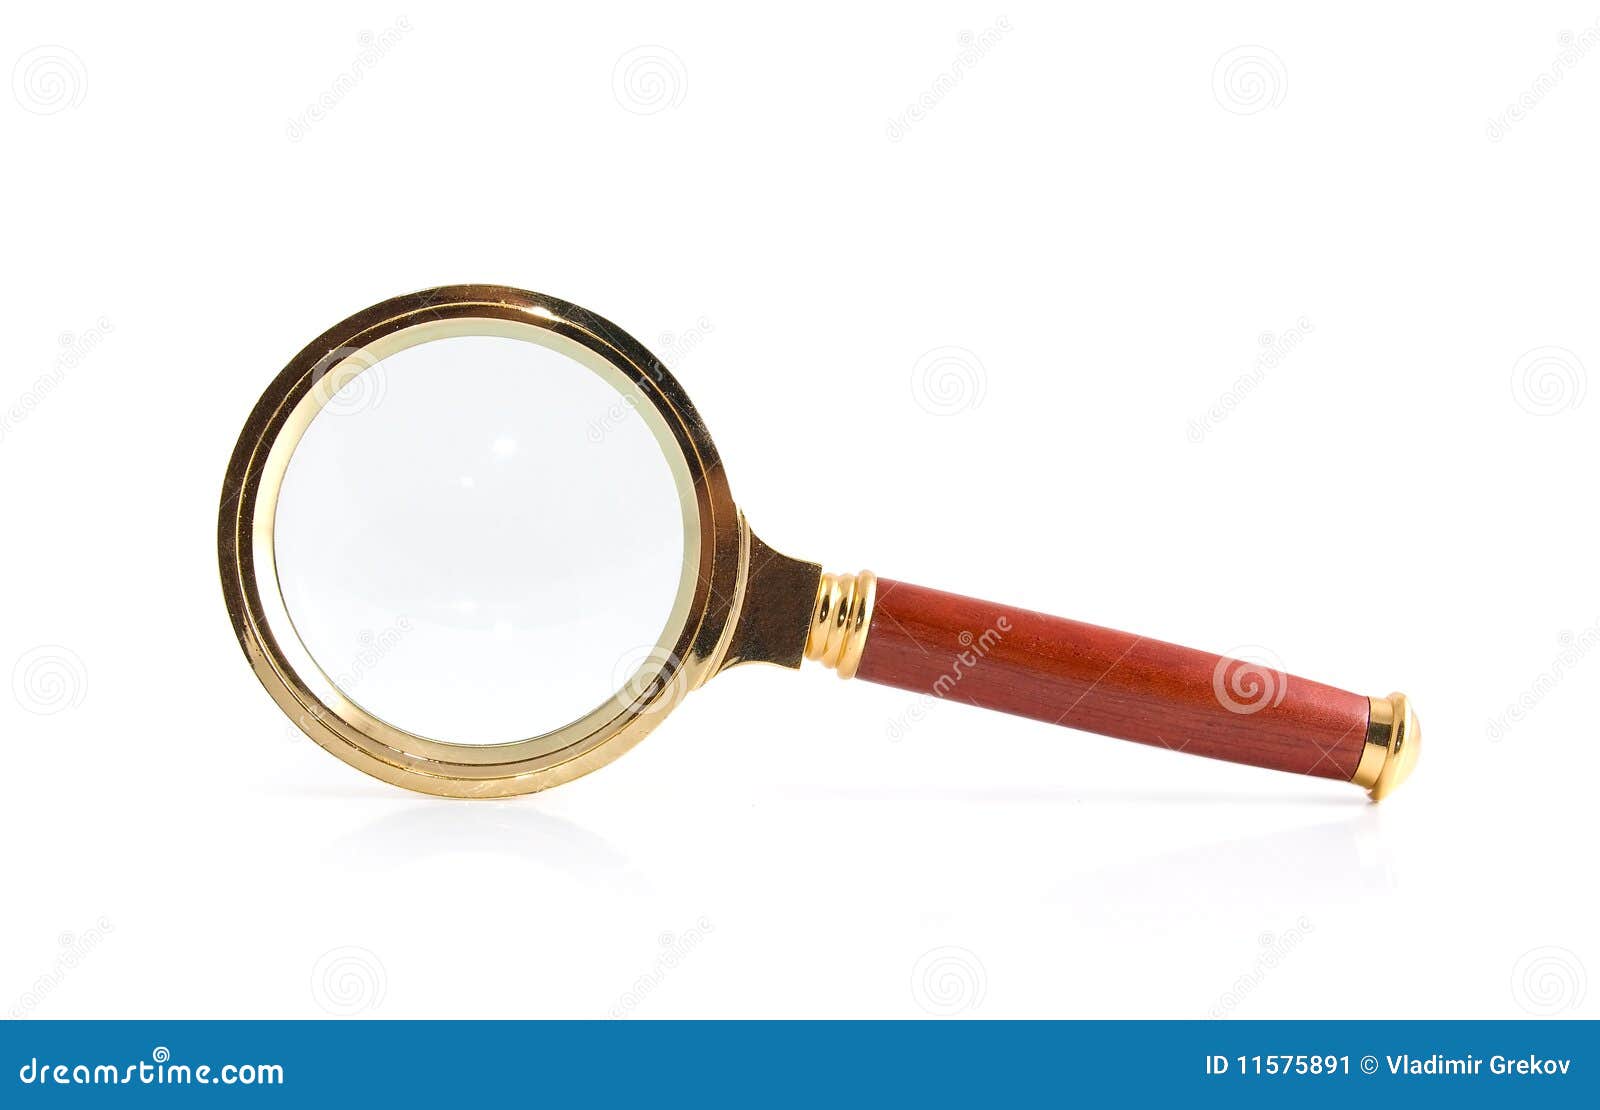 magnifier on a white